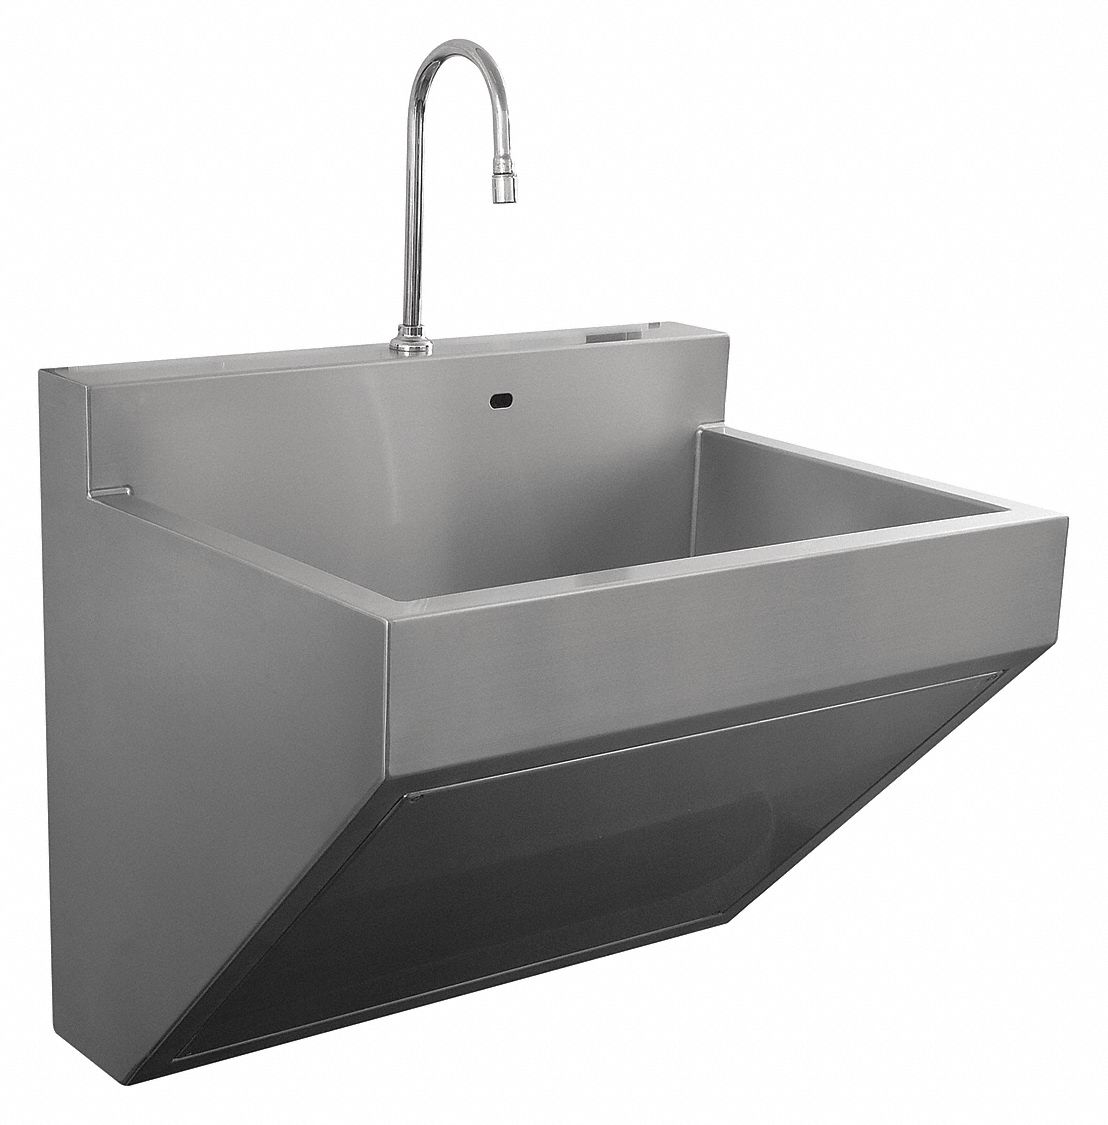 Scrub Sink: Scrub-Ware, 1.2 gpm Flow Rate, Wall, 17 1/4 in x 25 1/2 in Bowl Size, 11 in Bowl Dp